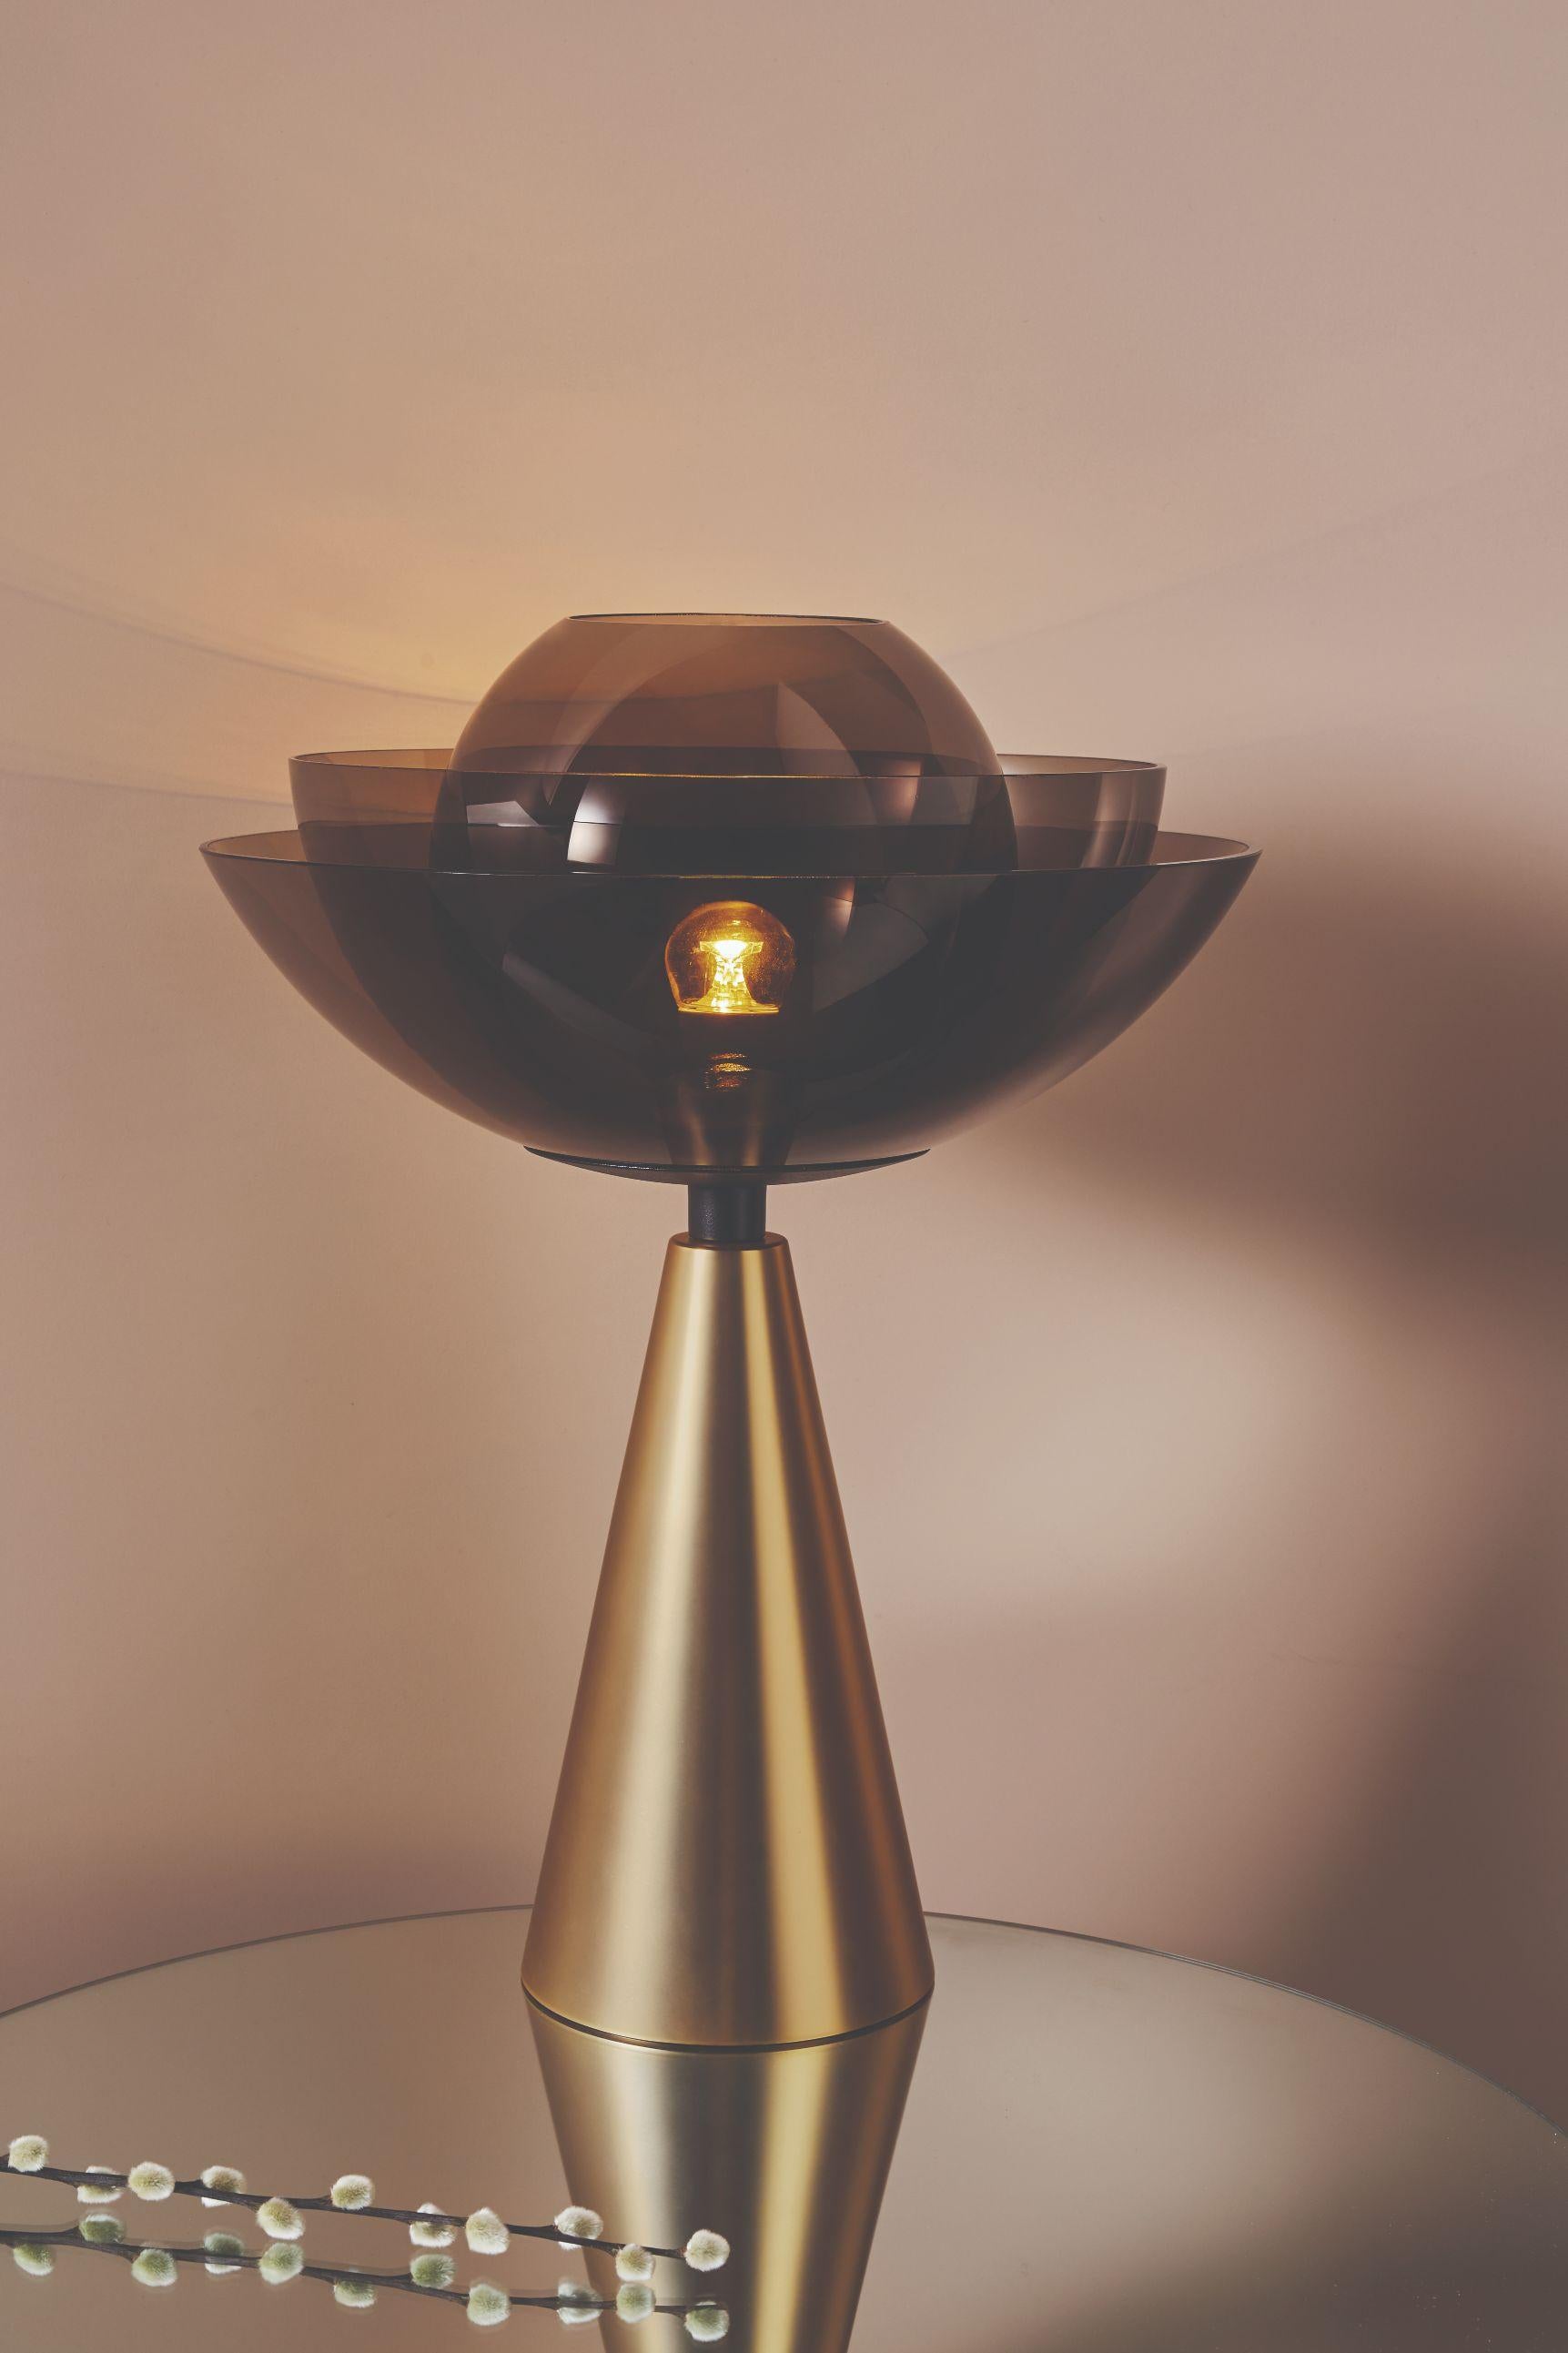 Lotus table lamp by Mason Editions.
Dimensions: 36 x 36 x 48 cm.
Materials: Brown glass and metal.

With its fascinating shape and heady scent, for many Asian cultures, the lotus flower symbolizes elegance,
beauty, perfection, purity, and